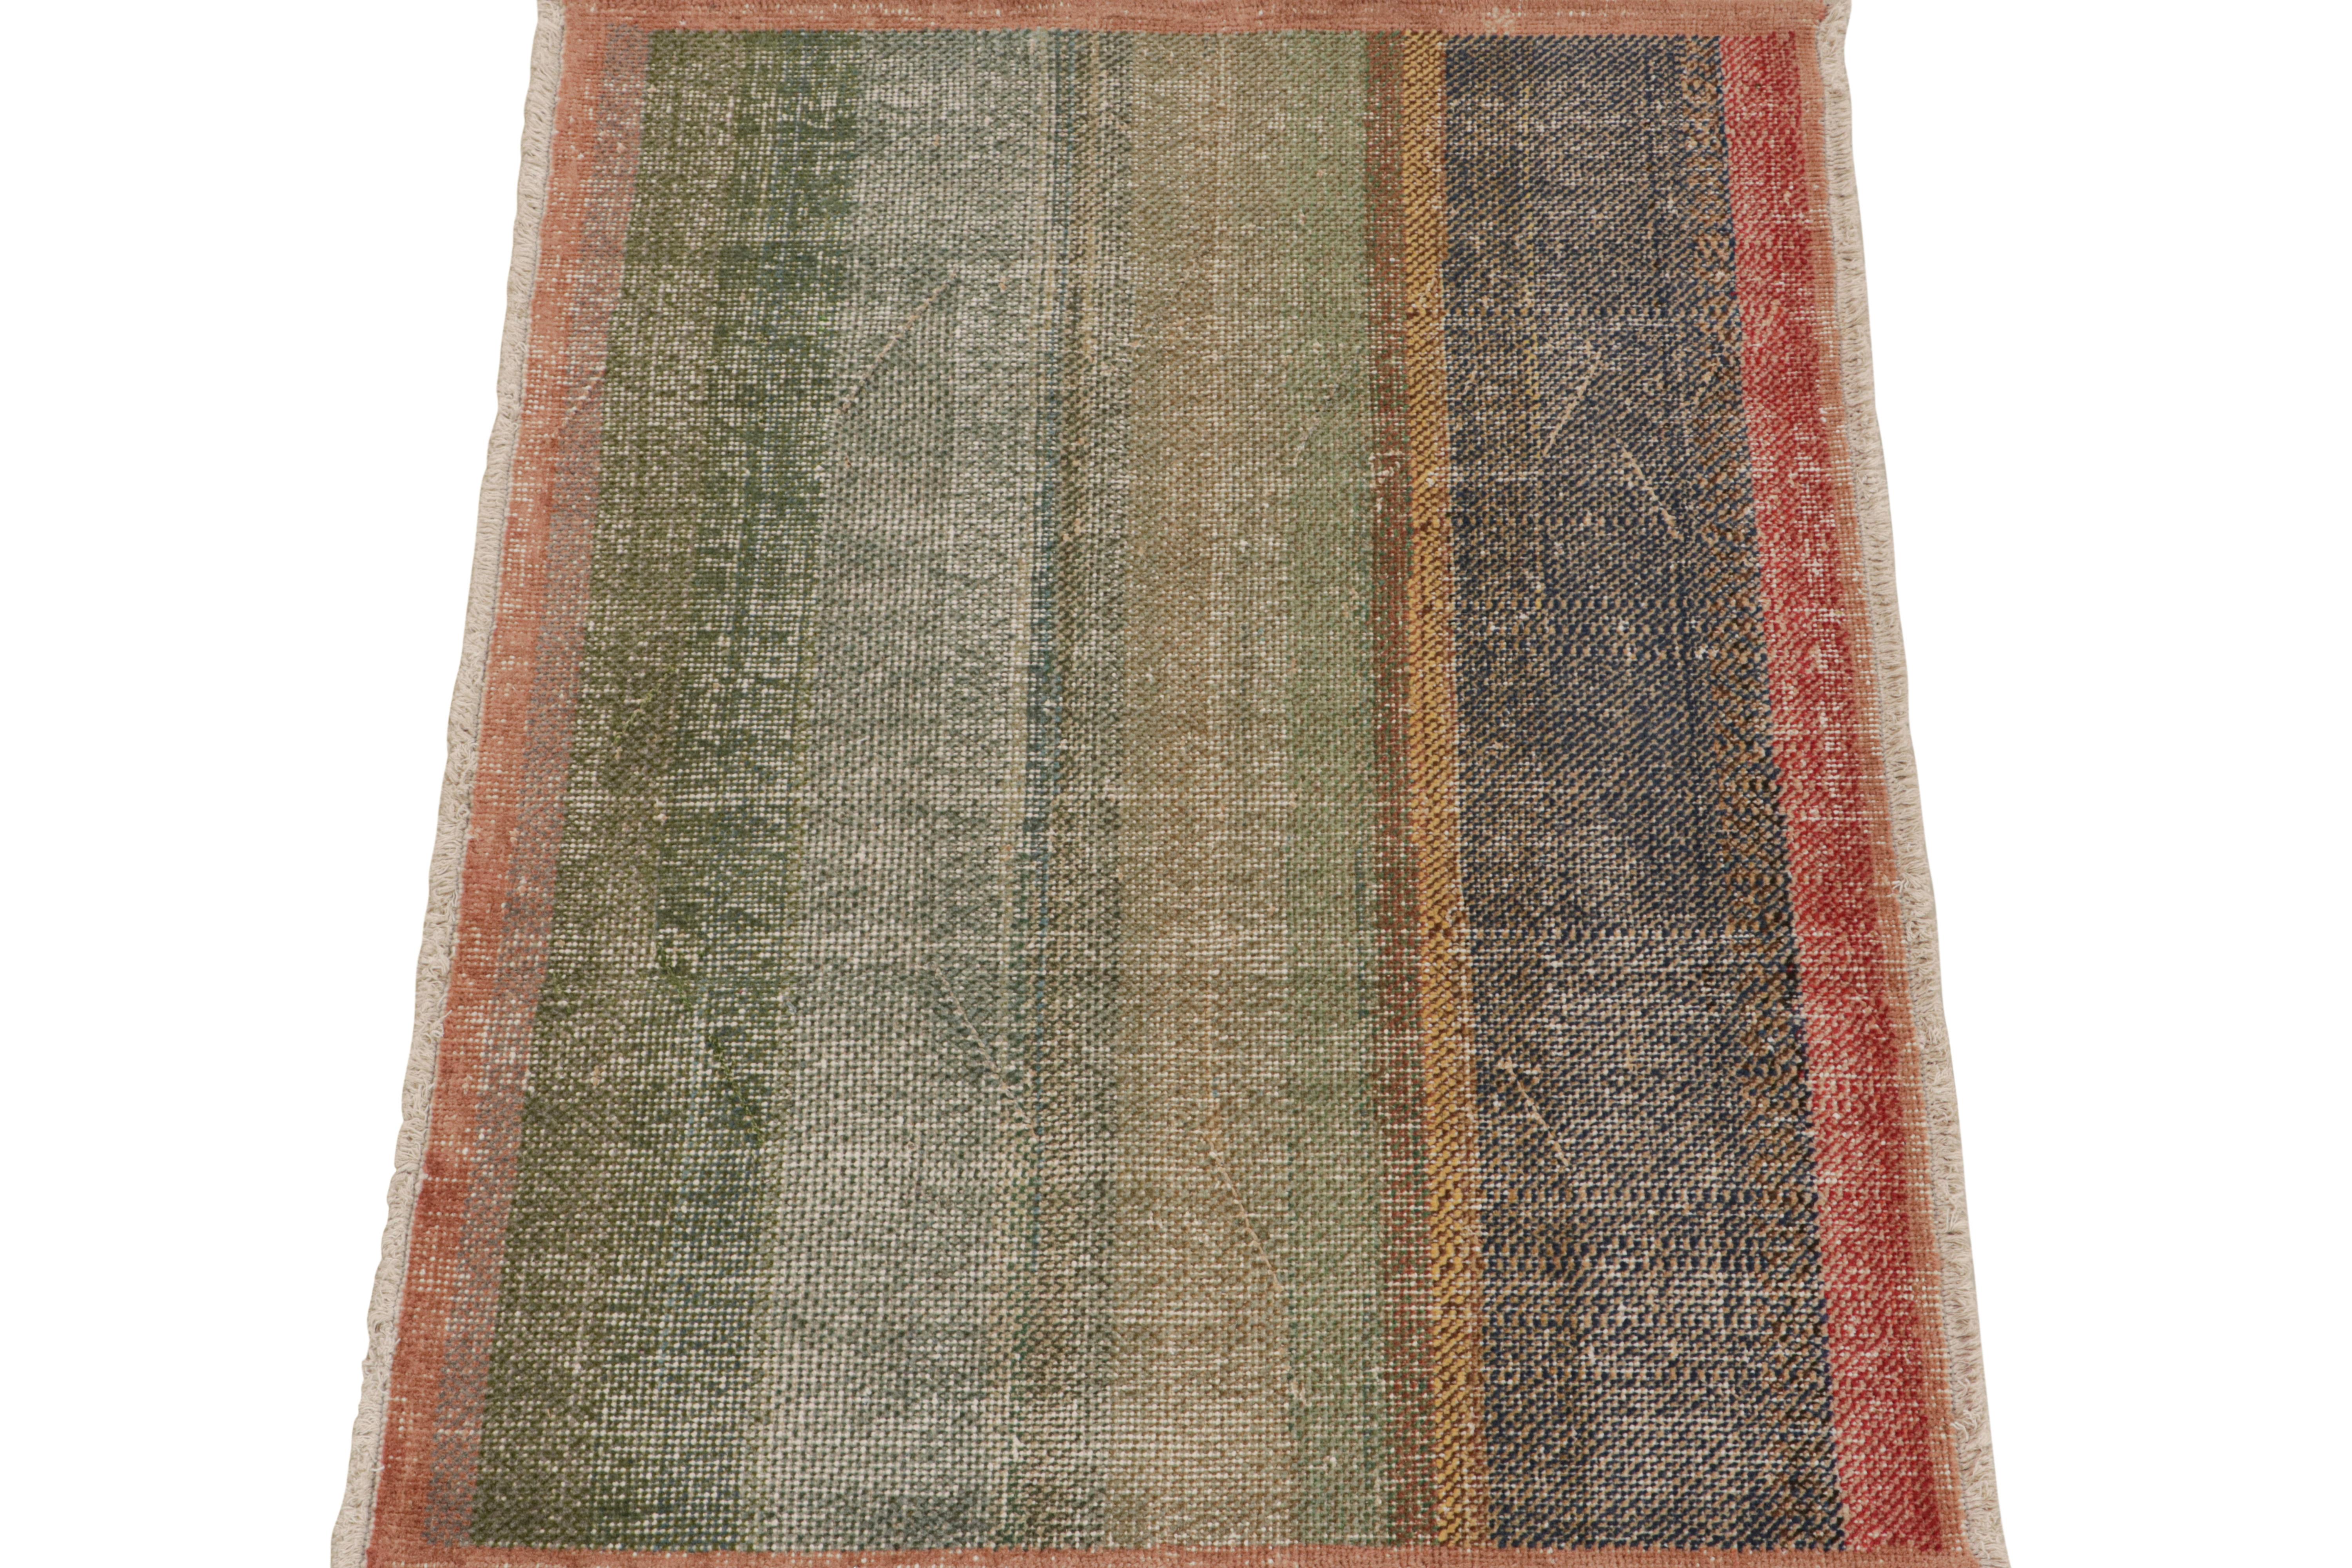 This vintage 3X4 rug is an exciting new addition to Rug & Kilim’s mid-century Pasha collection. This line is a commemoration, with rare curations we believe to hail from multidisciplinary Turkish designer Zeki Müren. Hand-knotted in wool, it